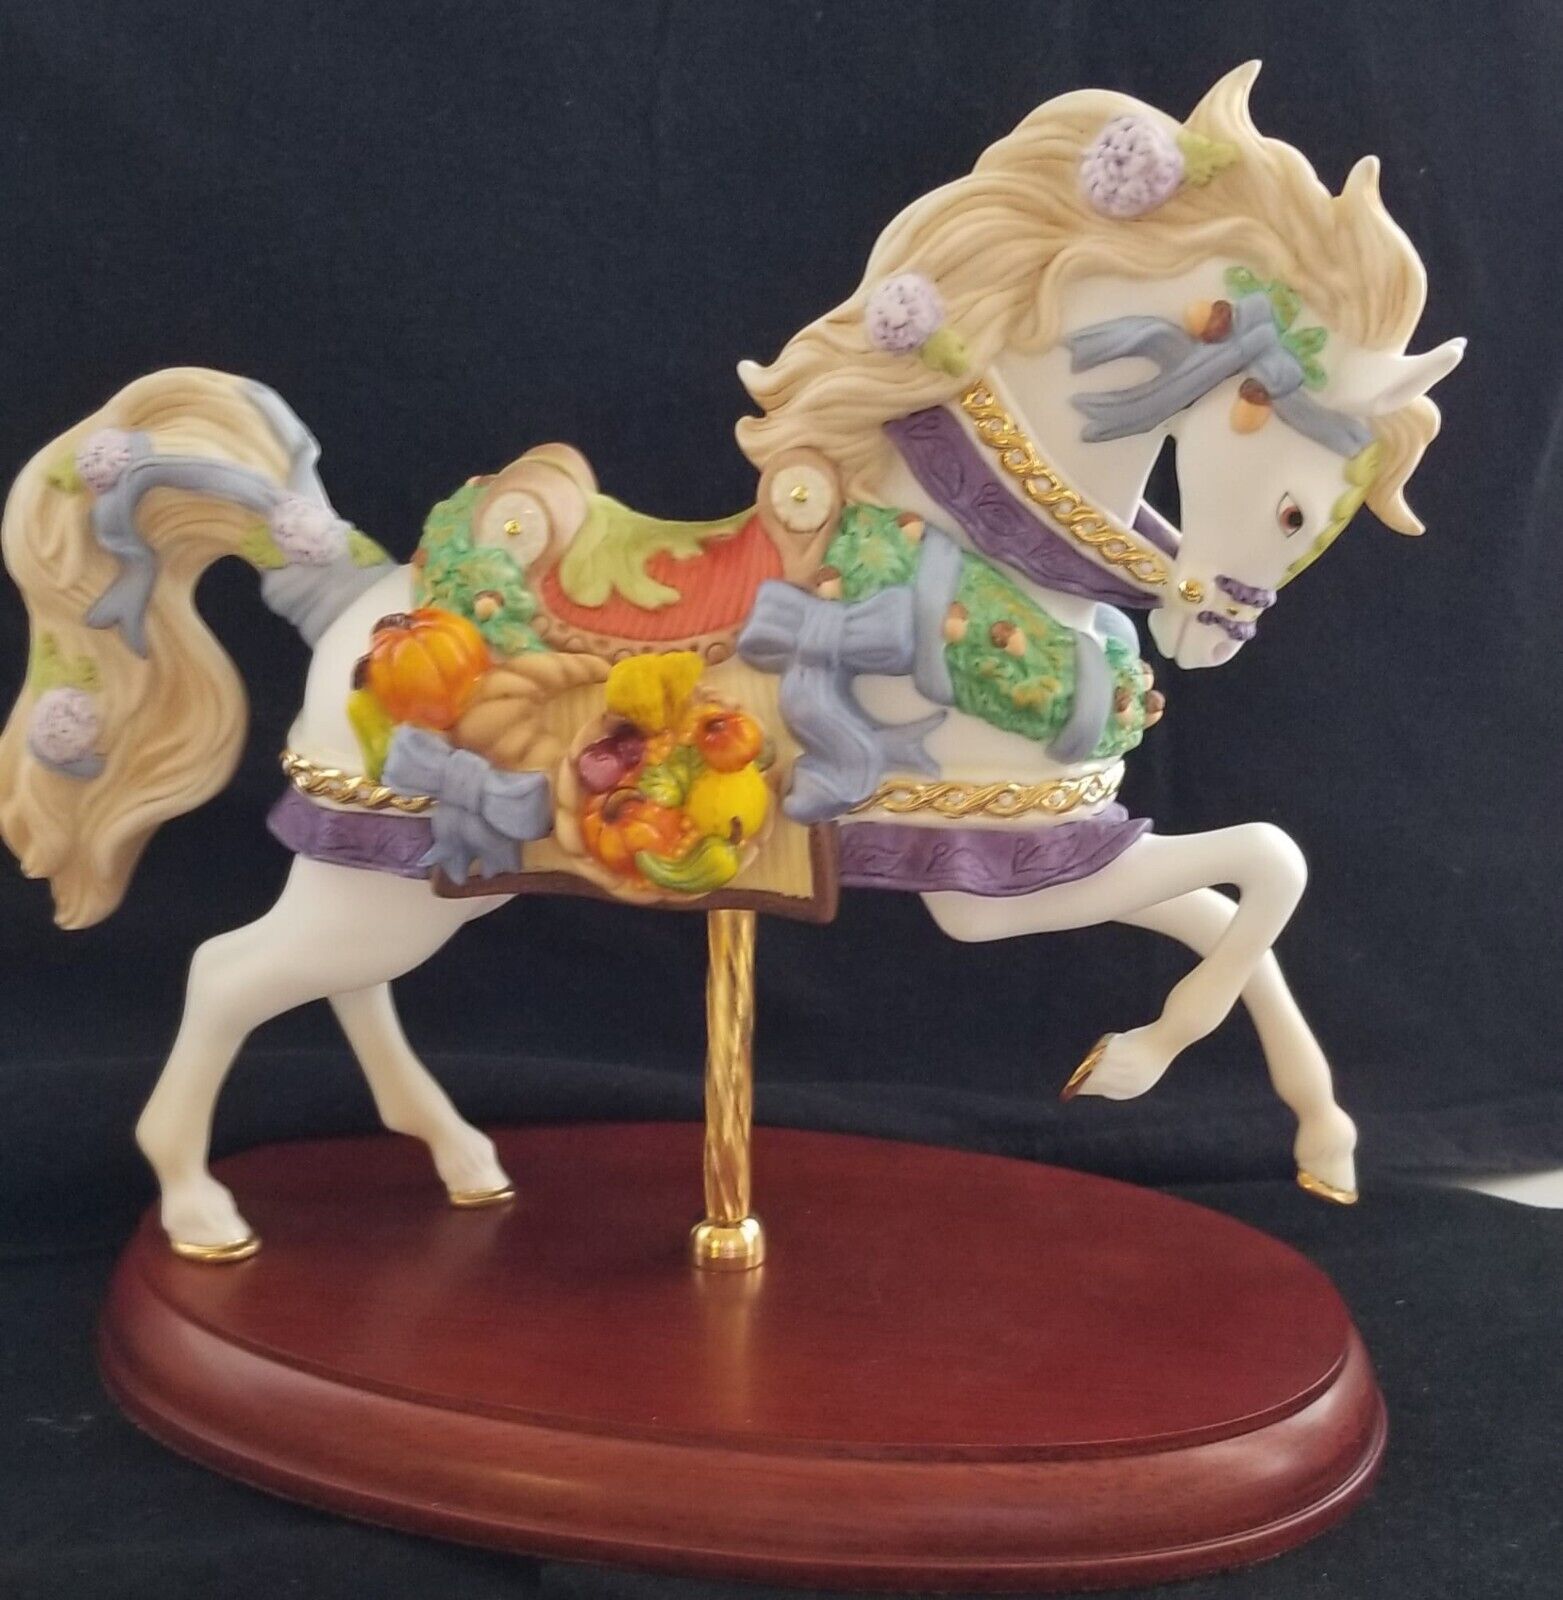 LENOX 2000 LIMITED EDITION PORCELAIN HAND PAINTED CAROUSEL HORSE FIGURINE